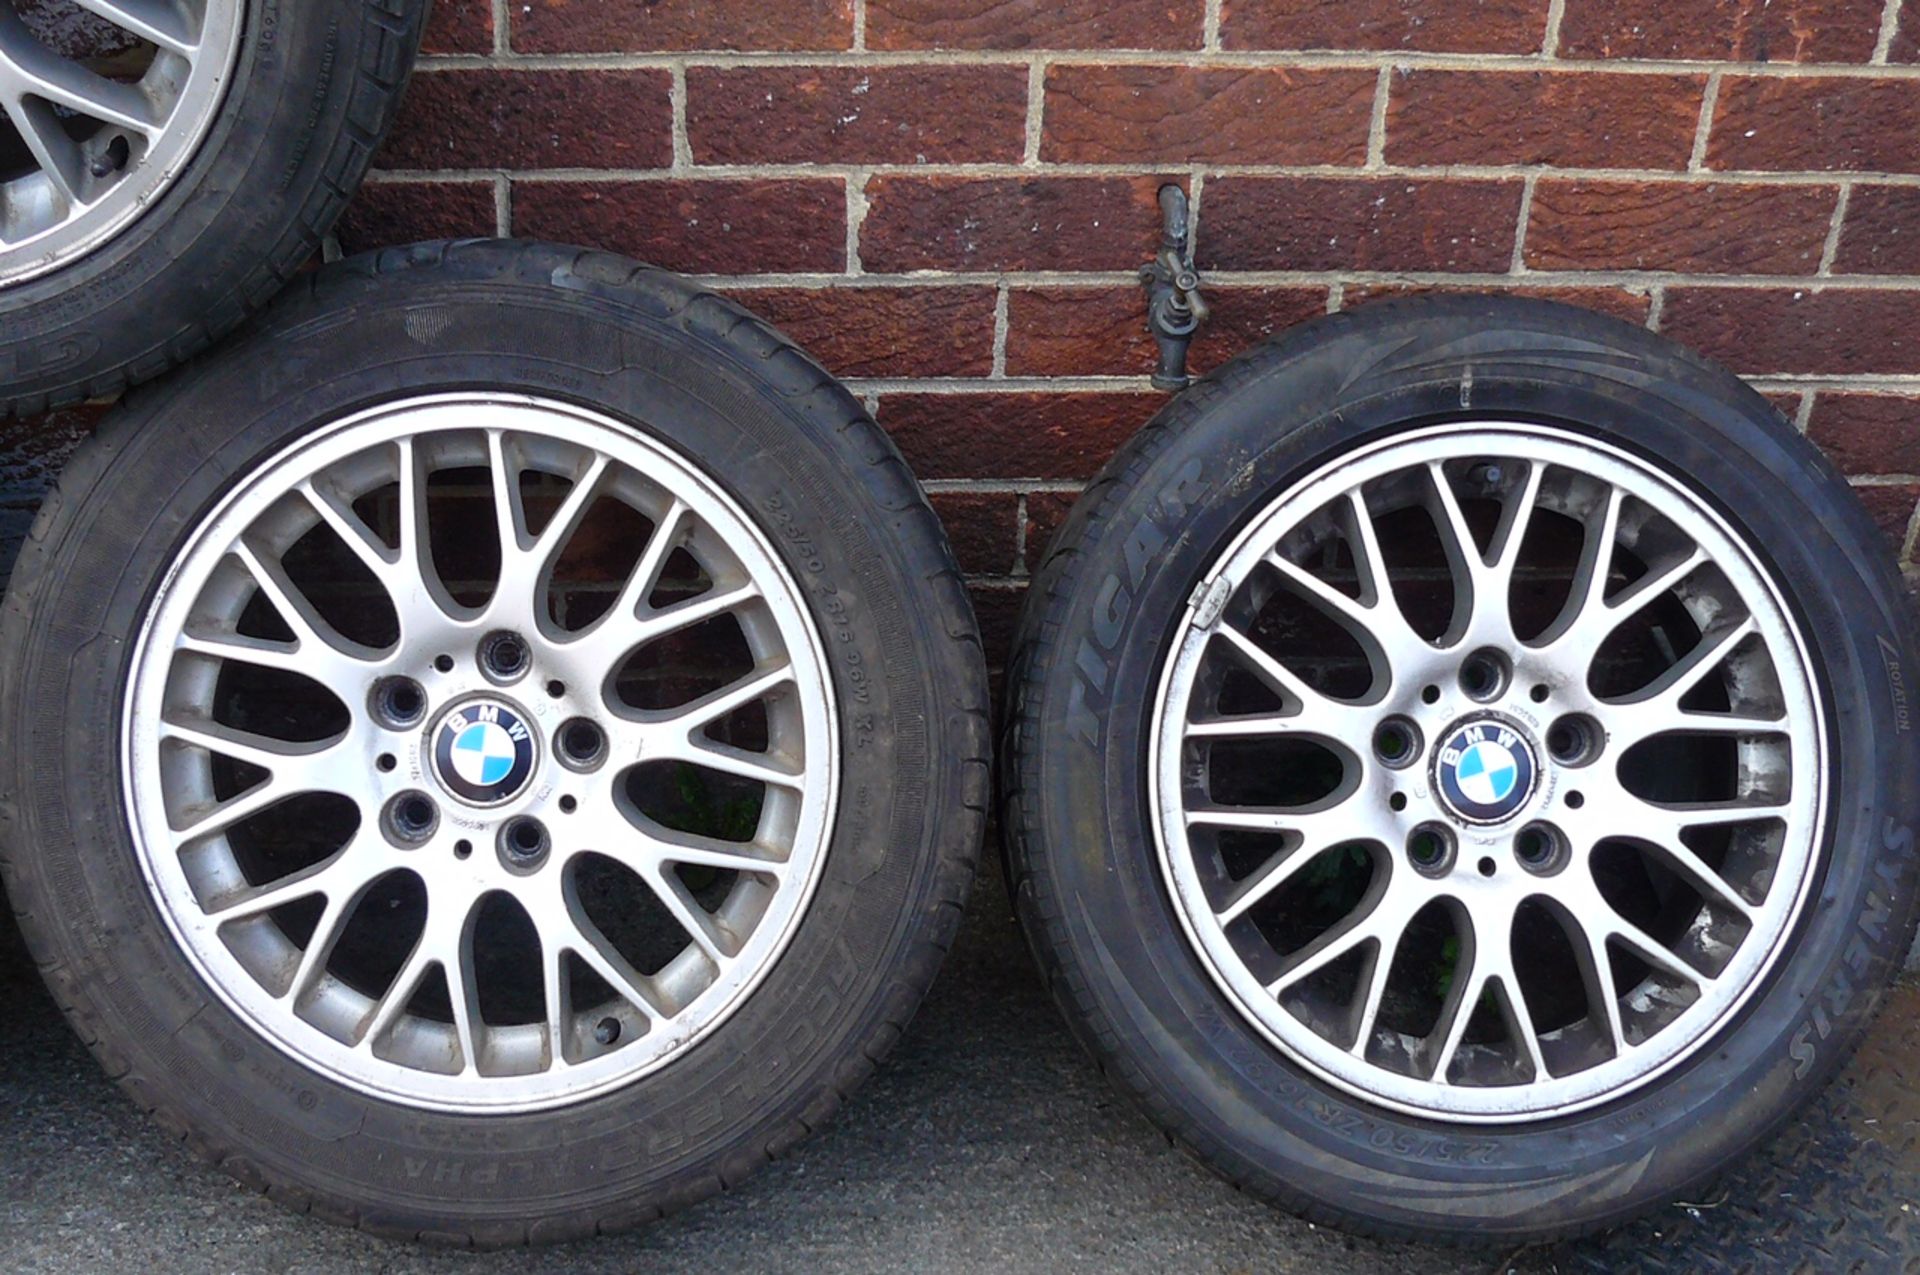 Set of 5 Wheels from BMW E46 325i - Image 2 of 3